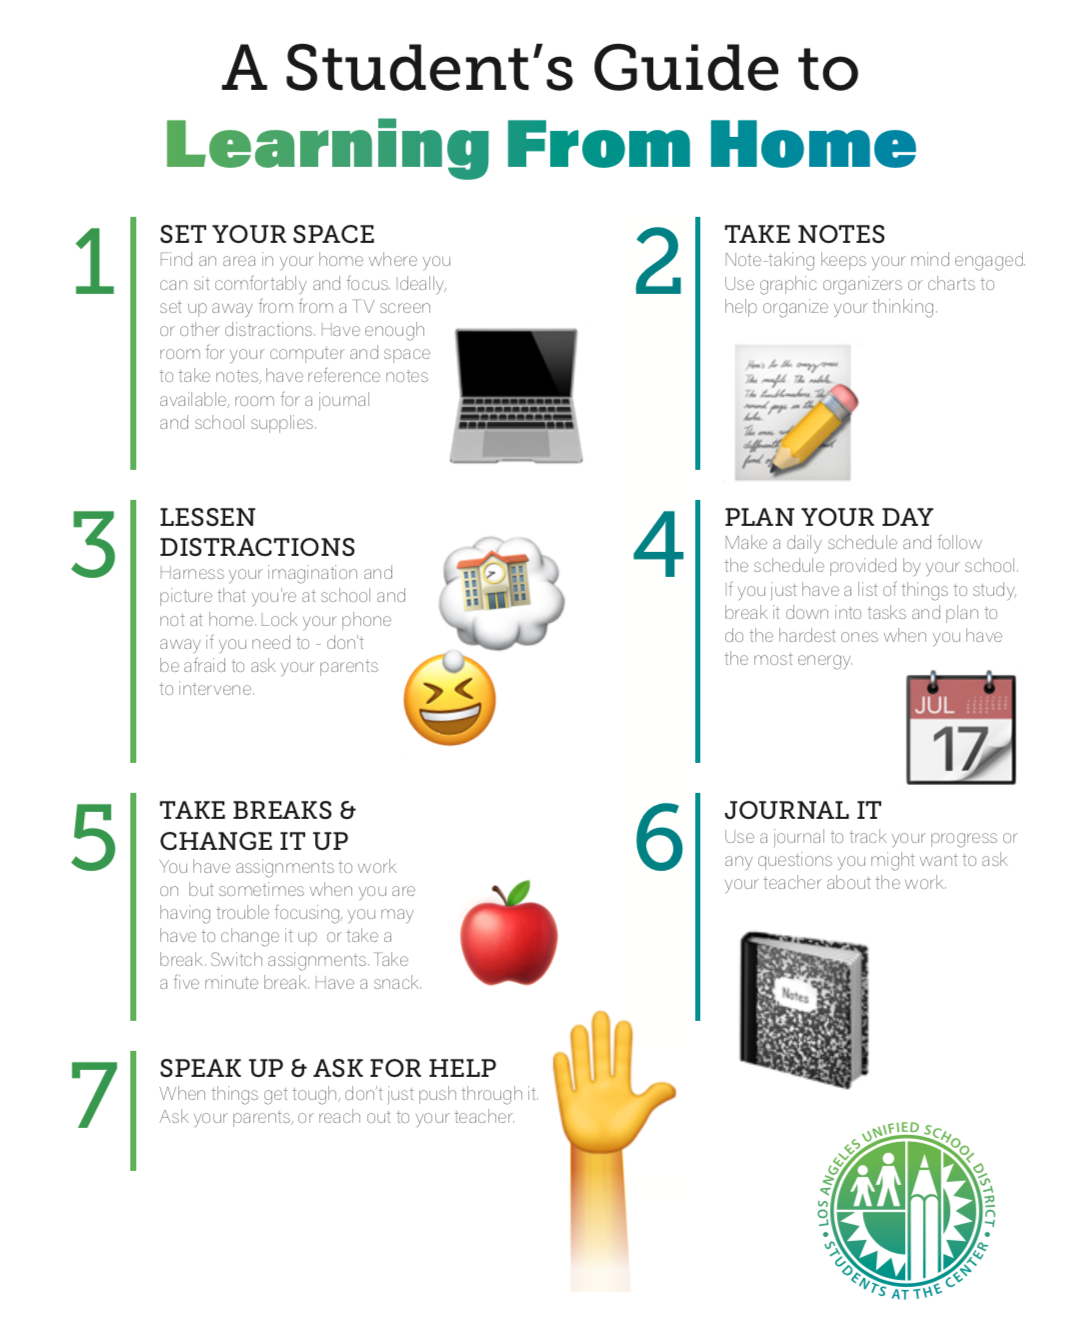 A Student's Guide to Learning From Home